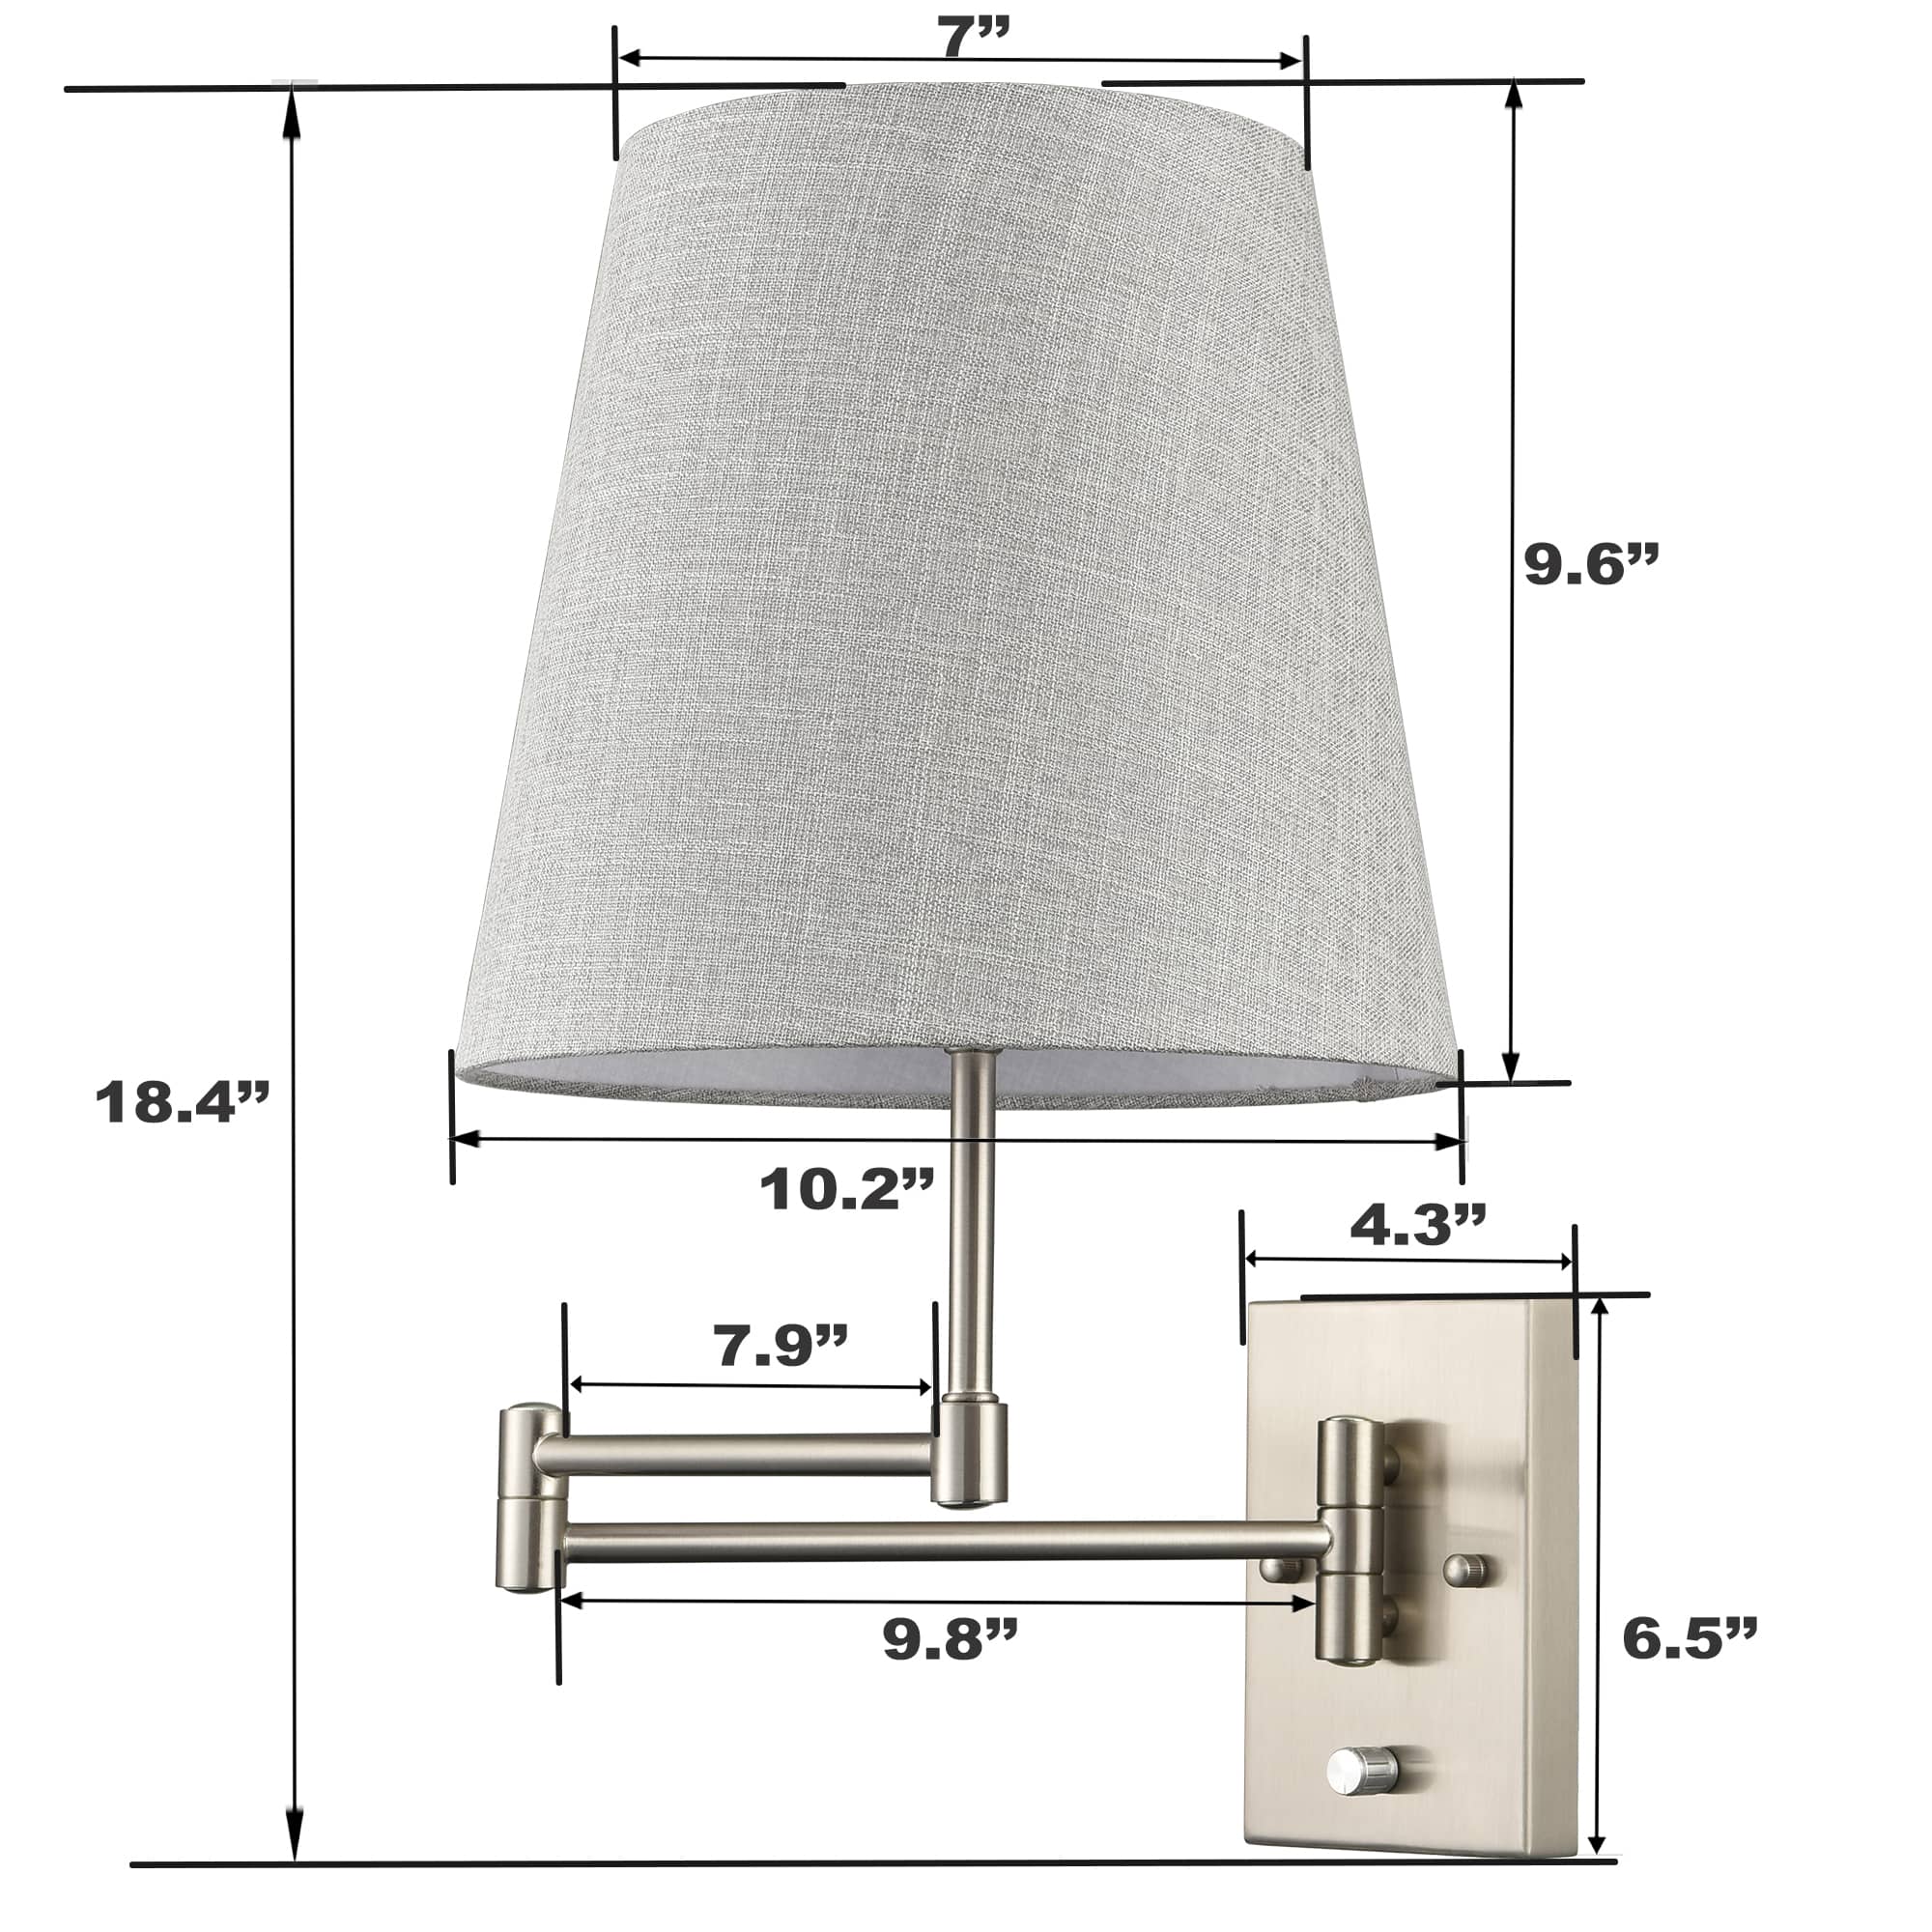 Modern Brushed Nickel Plug-in or hardwired Swing Arm Wall Lamp with Fabric Shade Set of 2